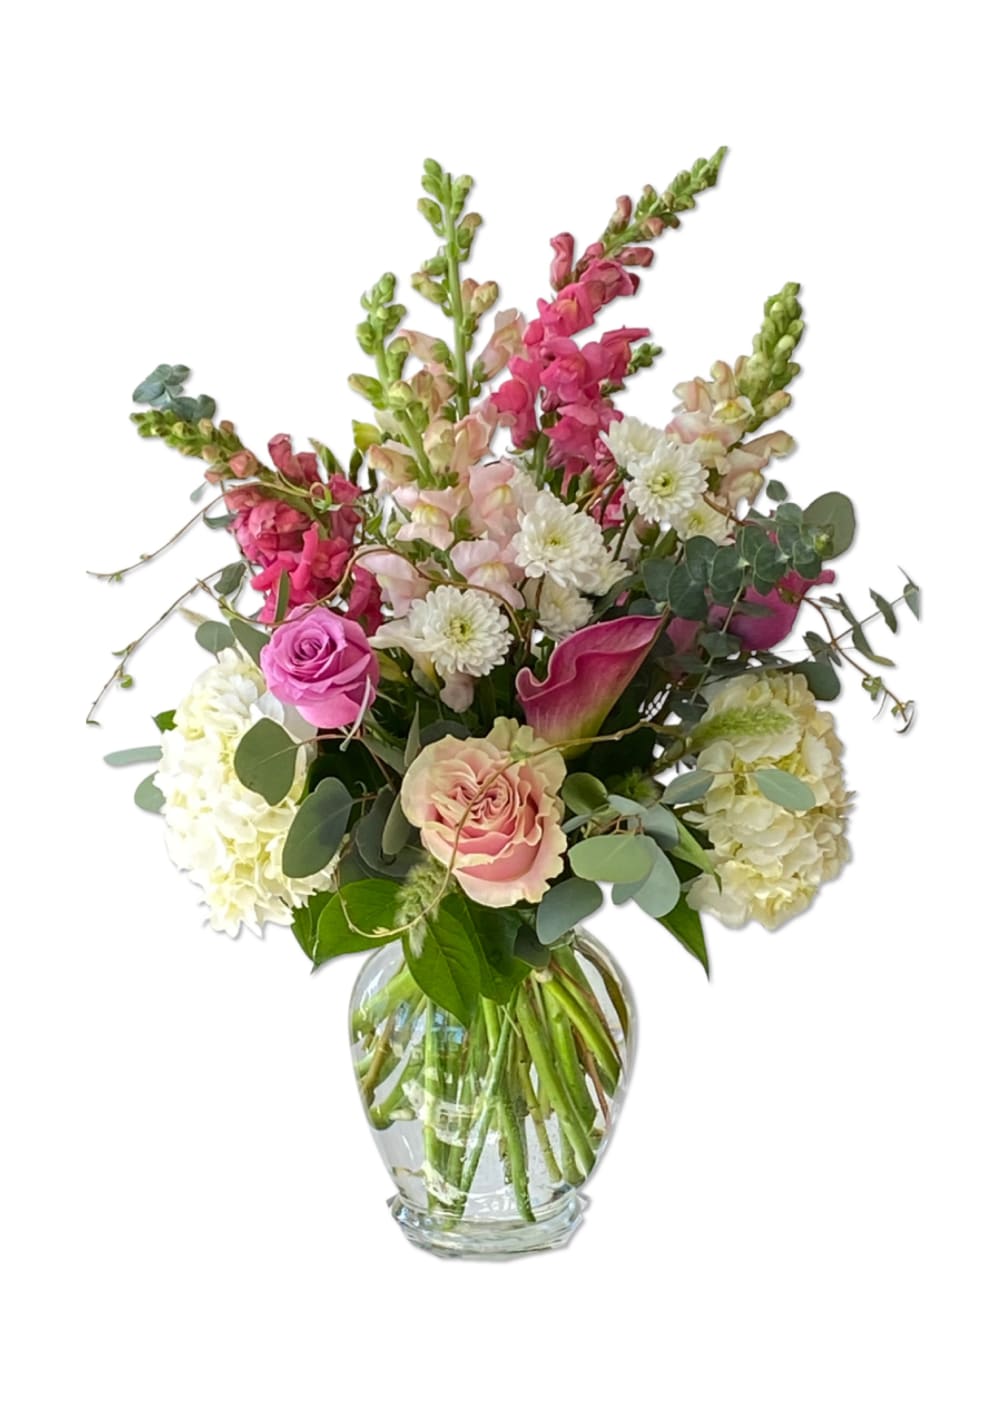 A perfect arrangement for the gardener or pastel flower lover, this lovely